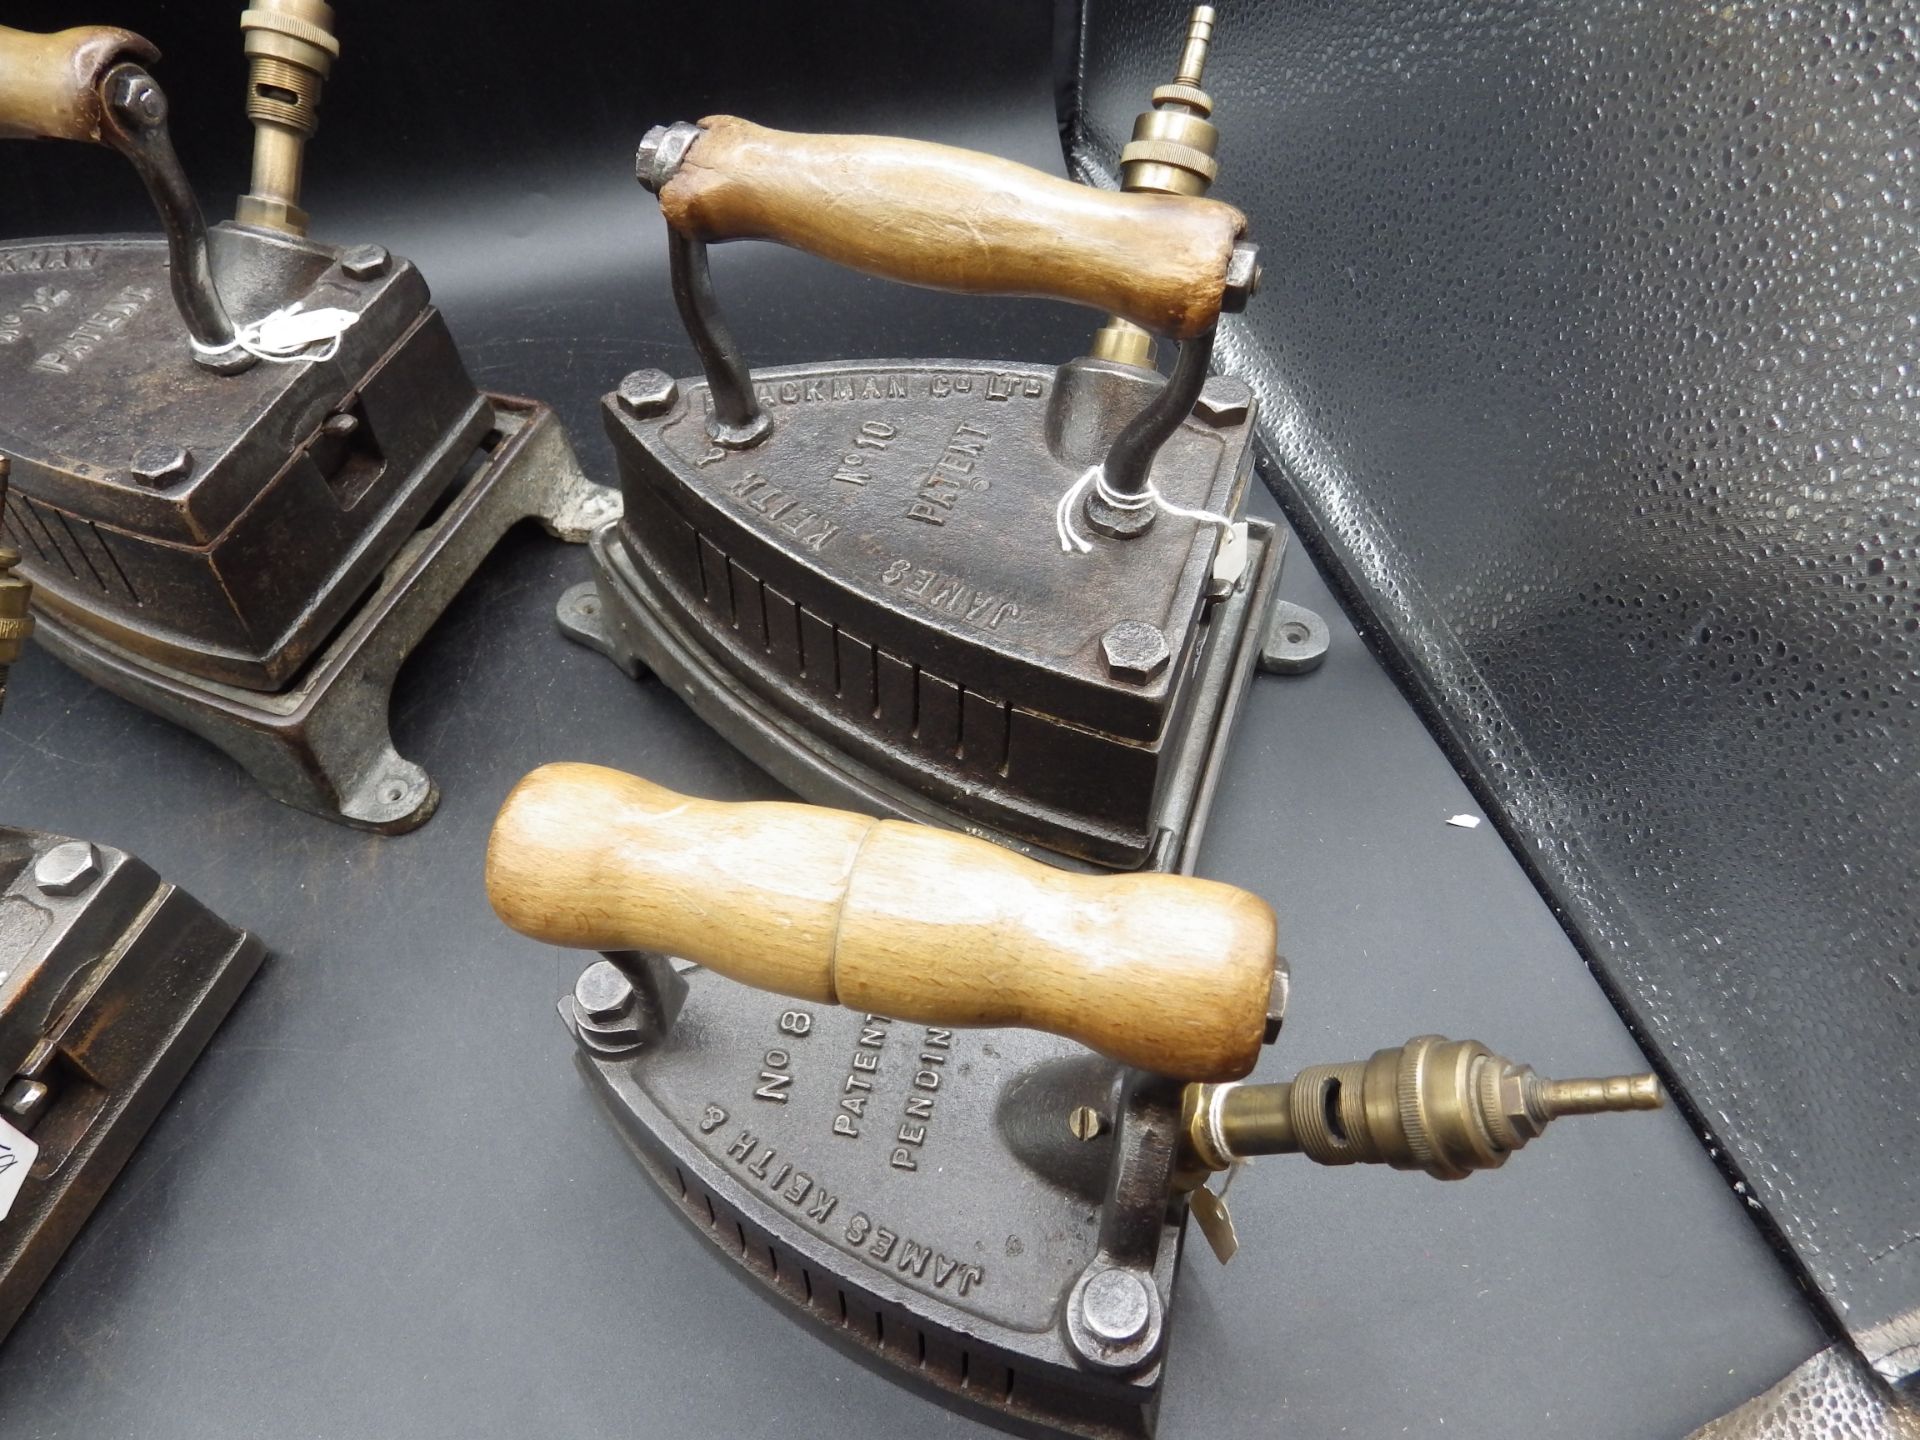 4 James Keith & Blackman Co ltd gas irons to incl No.8 patent pending, 2x No.10 one with trivet - Image 3 of 4